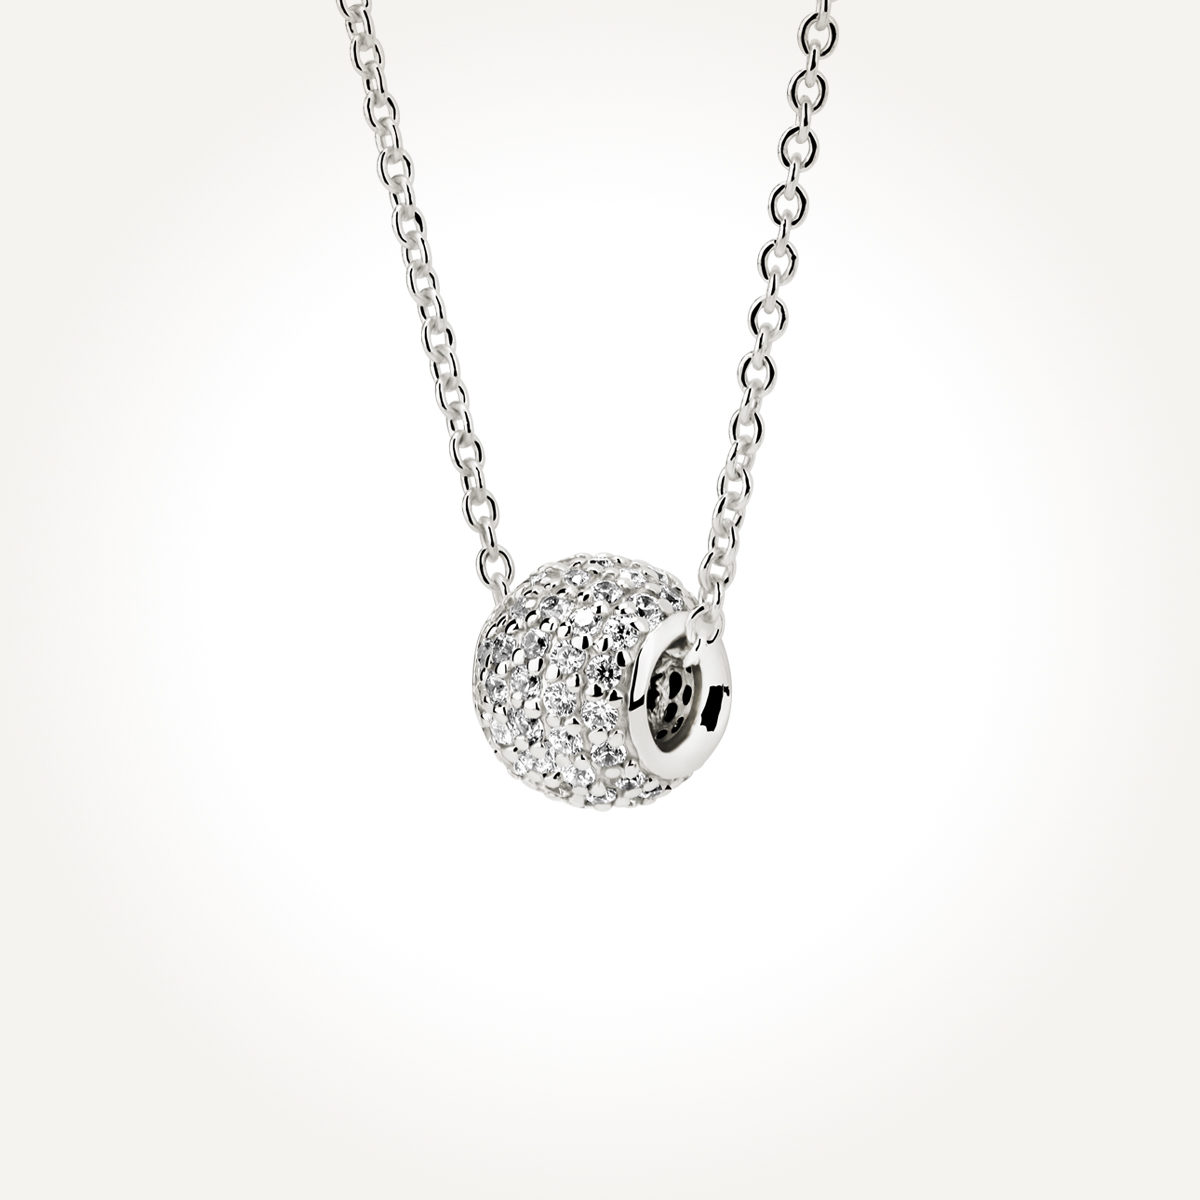 14KT White Gold Diamond Cluster Ball Necklace